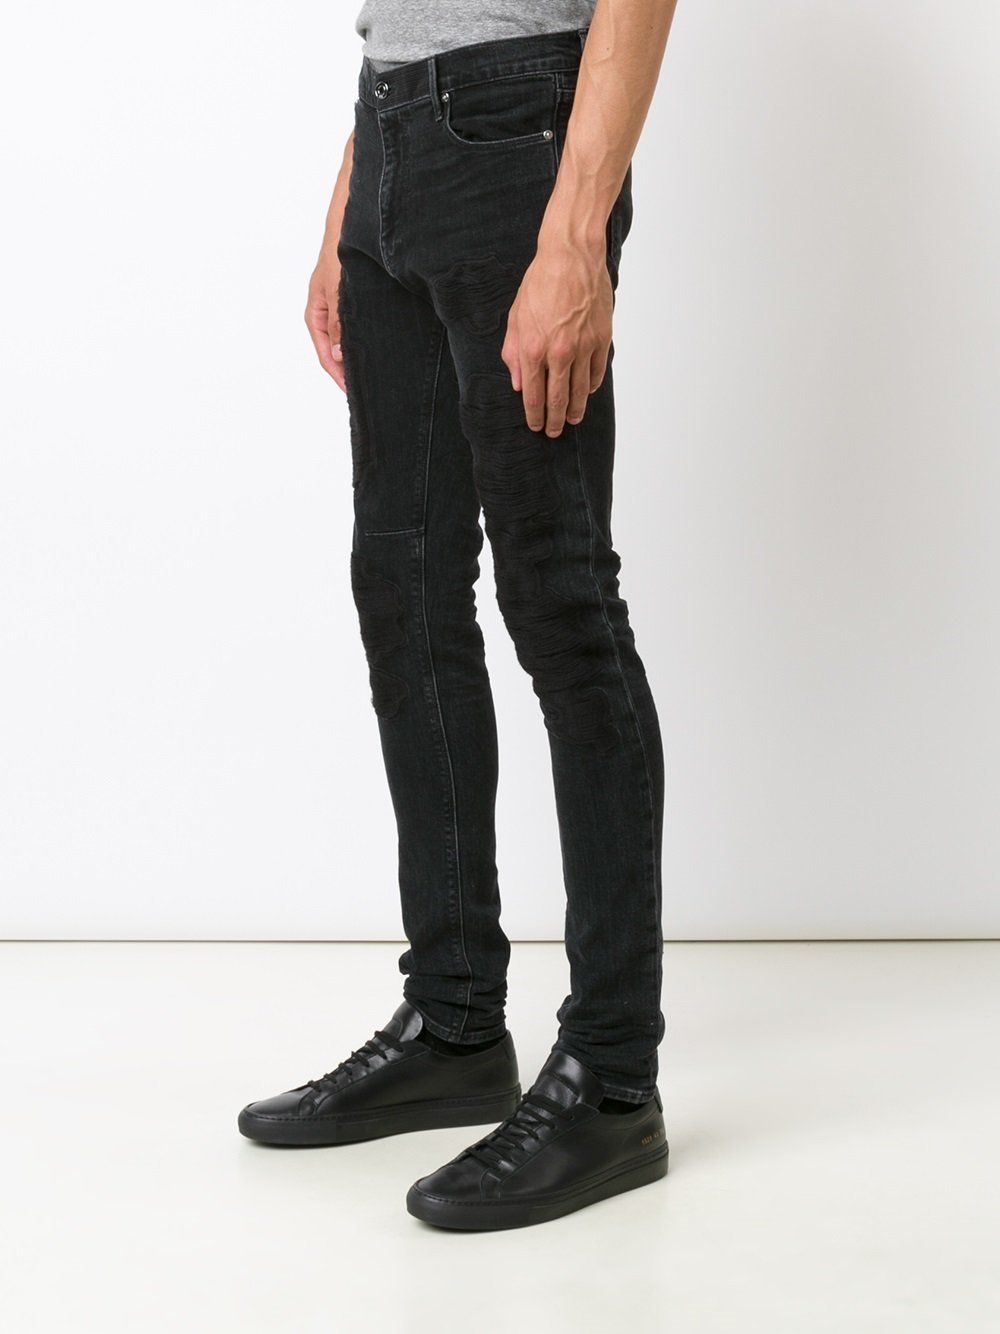 rta embroidered skinny jeans